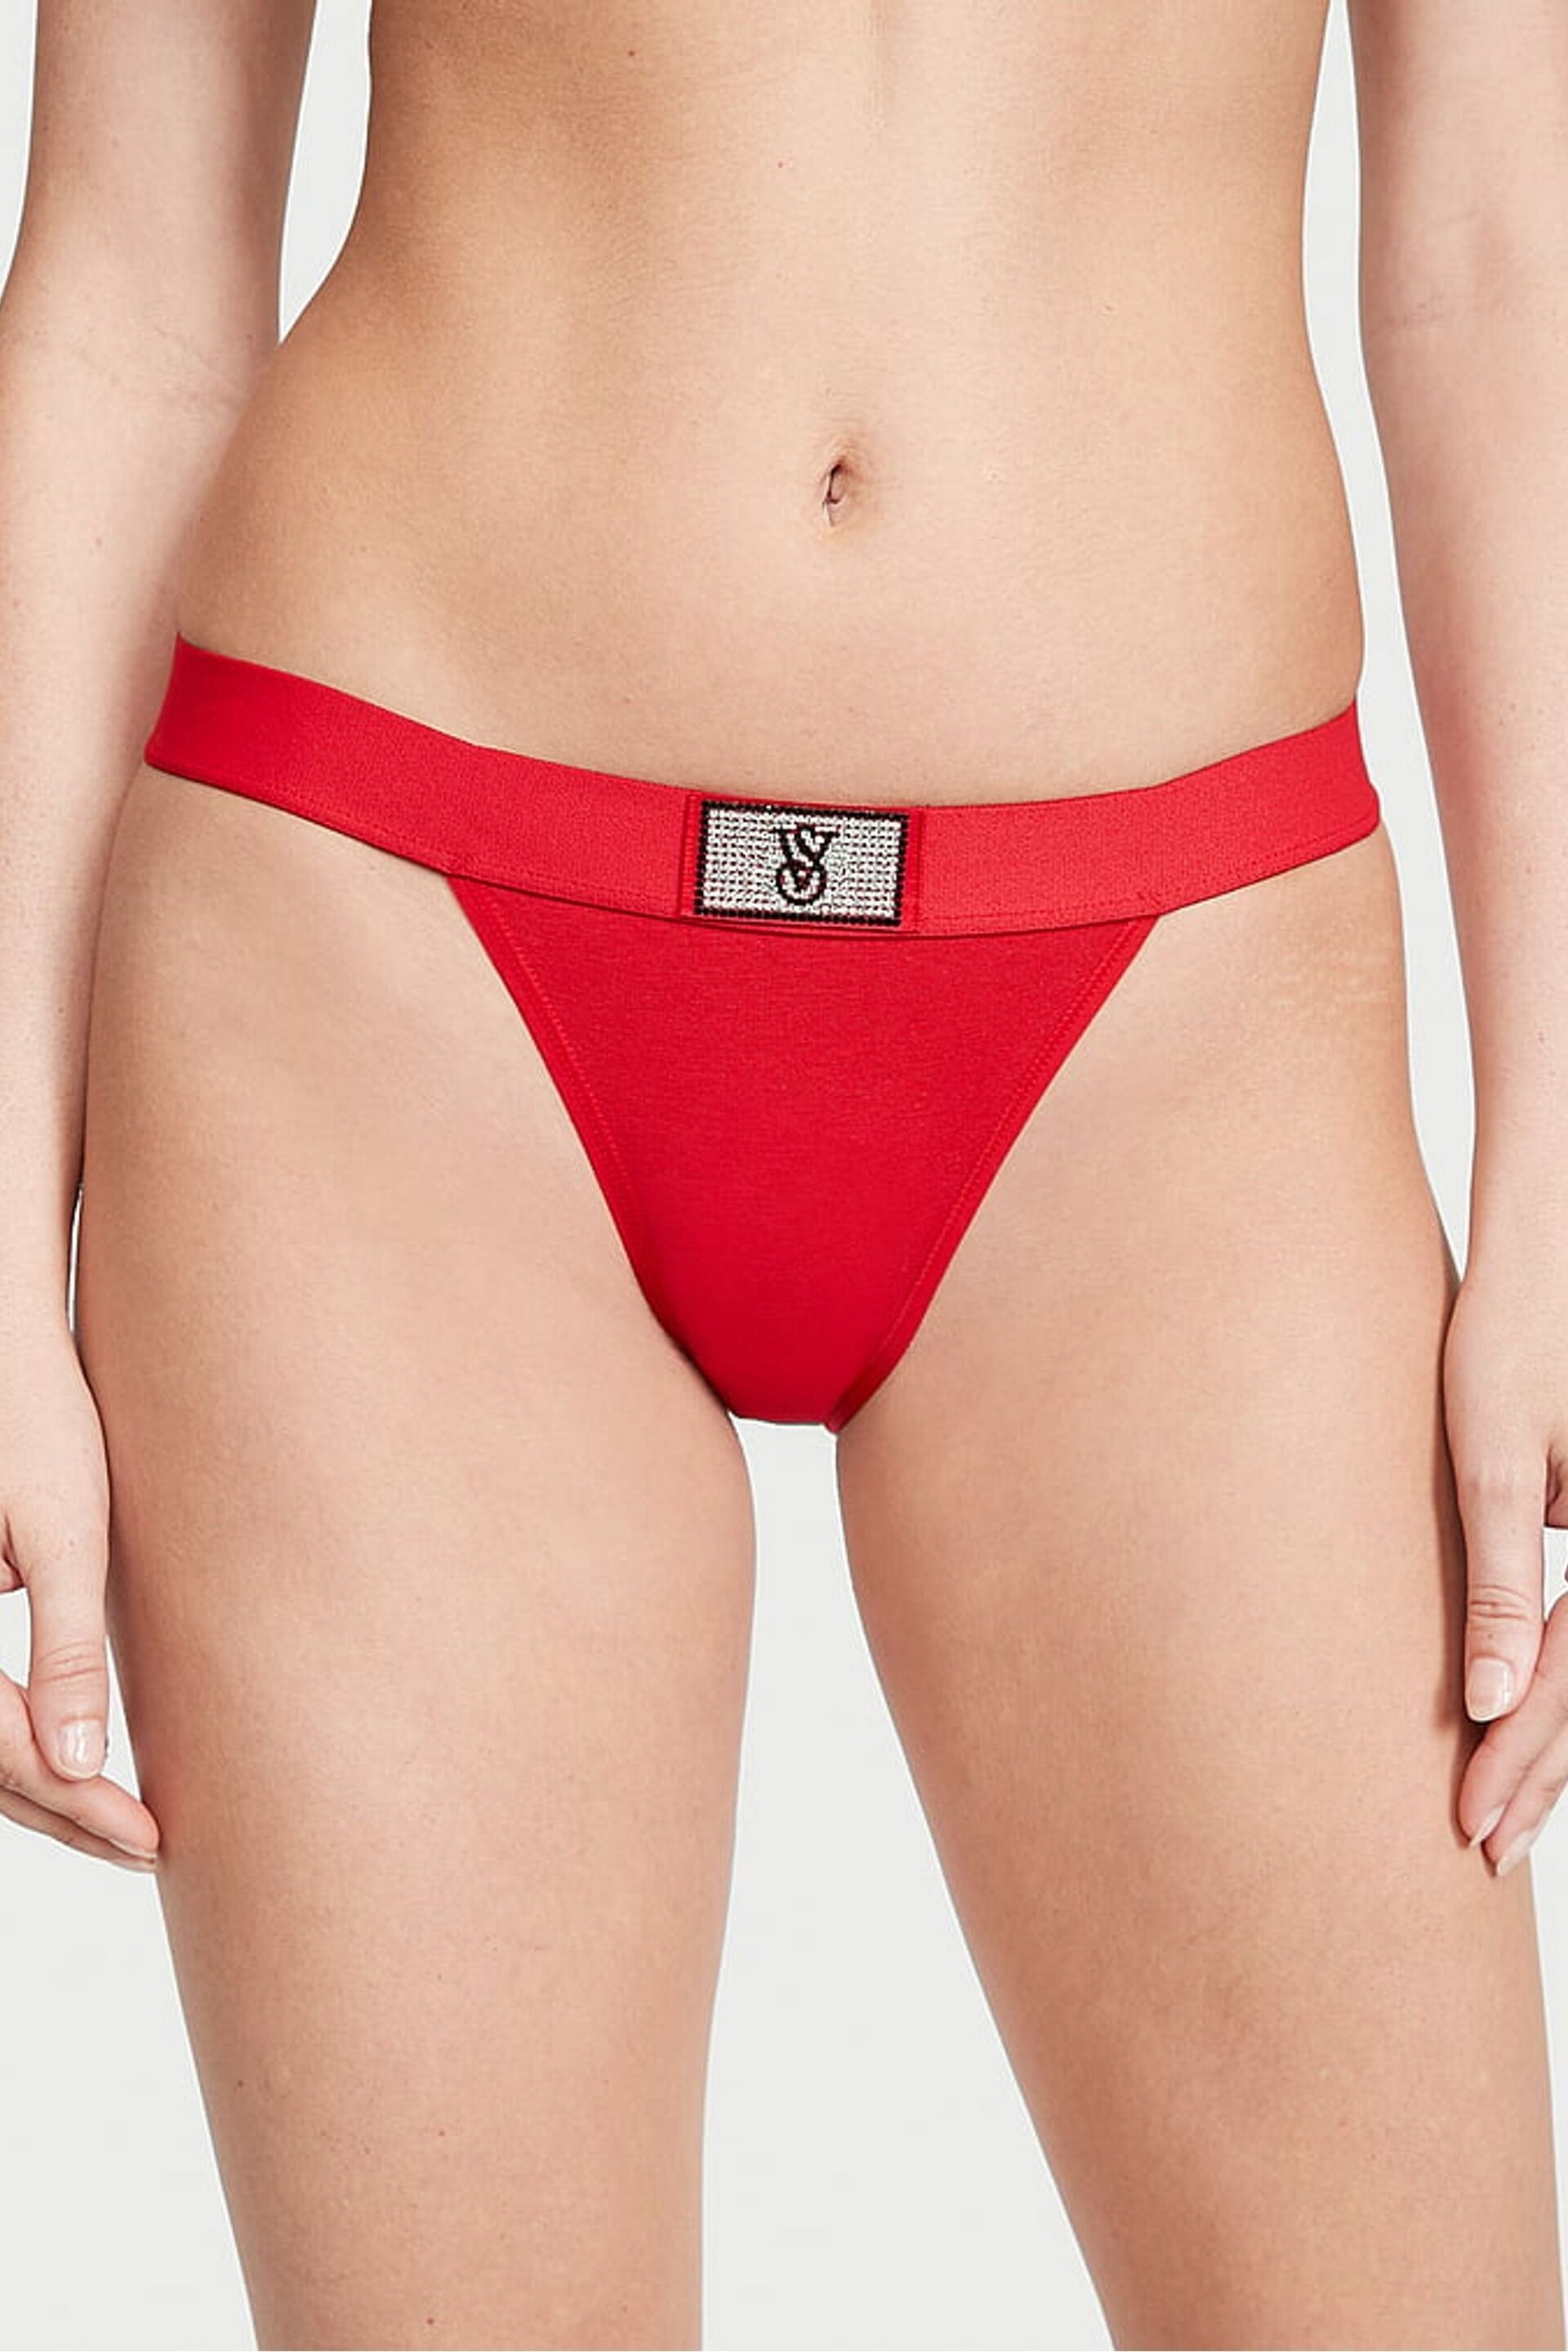 Victoria's Secret Lipstick Red Cheeky Knickers - Image 1 of 3